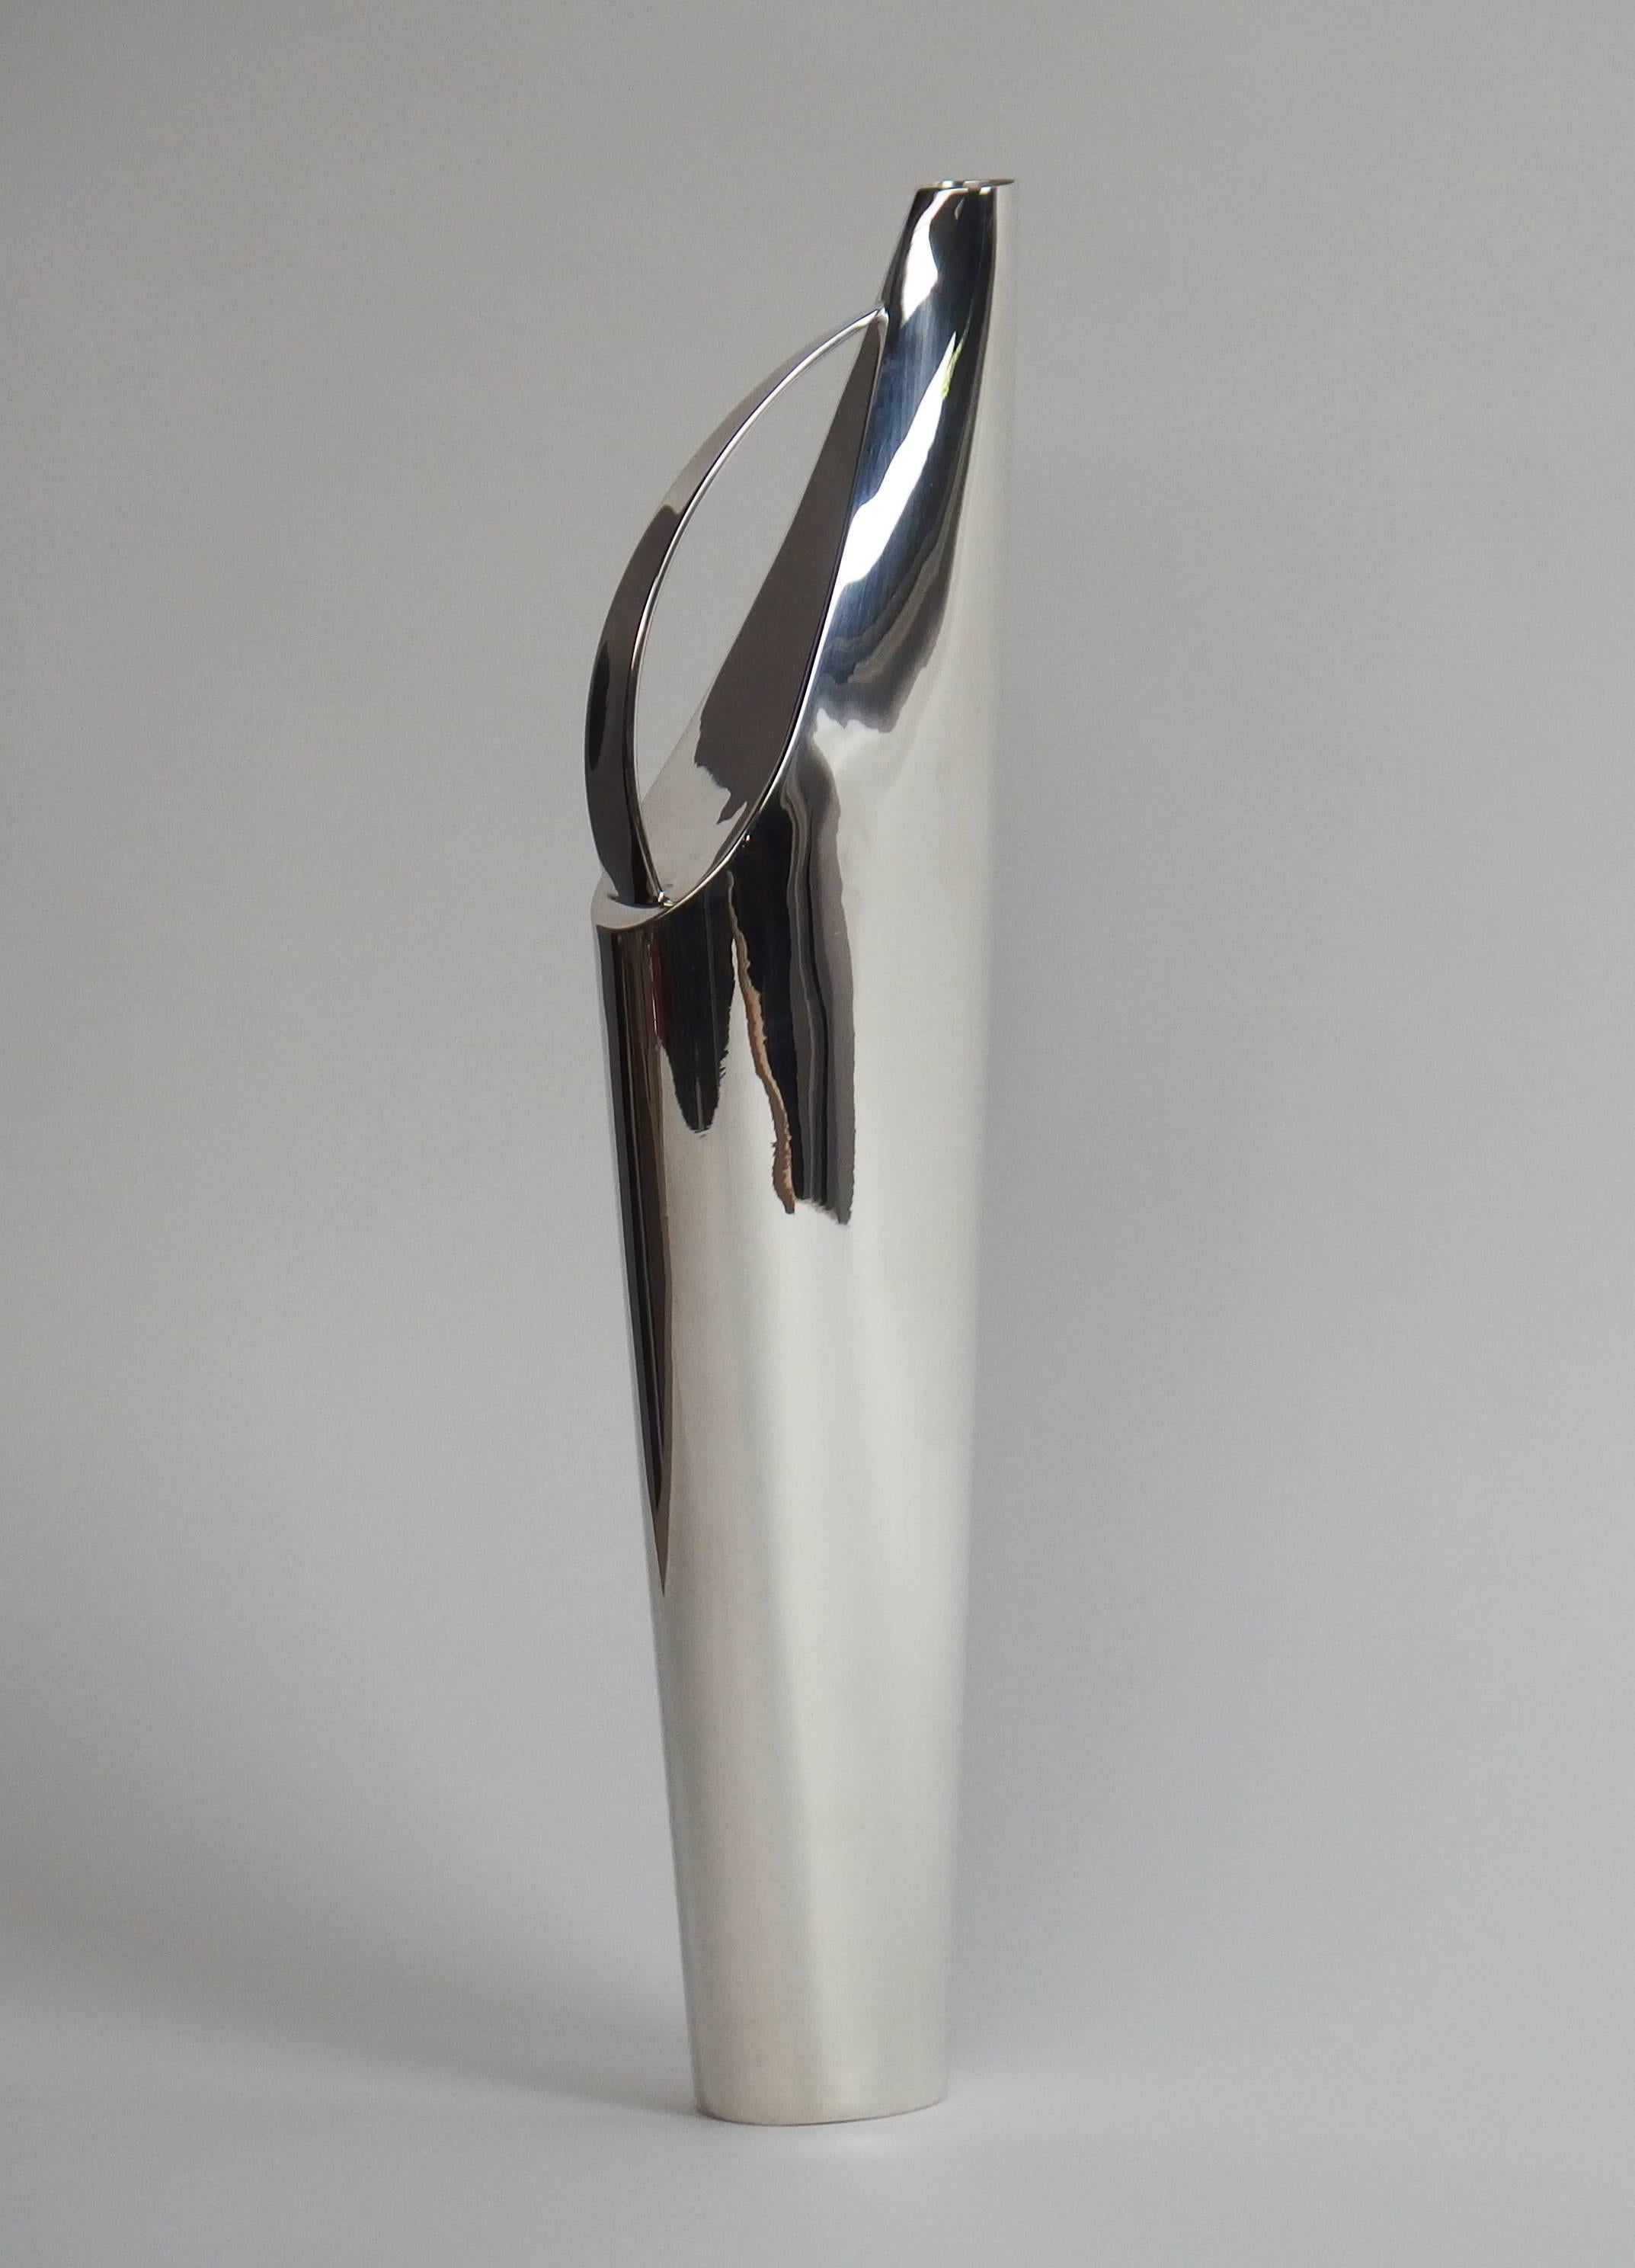 A rare tapering silver plated jug-vase designed by Lino Sabattini in the 1950s, edited by Gallia Christofle in the 1970s.